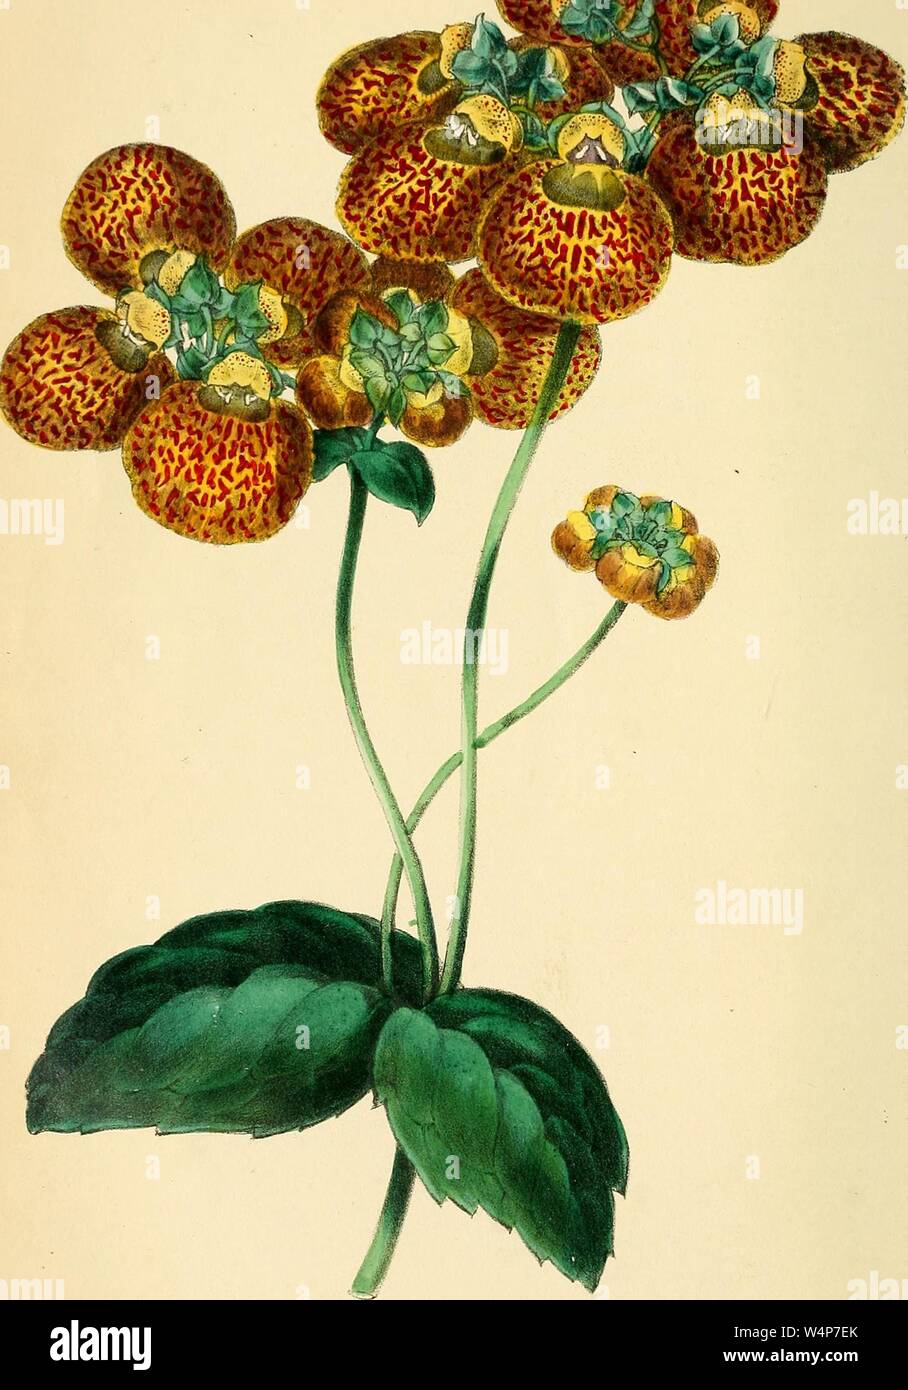 Engraved drawing of the Mr. Standish's Slipper-wort (Calceolaria standishii), from the book 'Paxton's Magazine of Botany' by Sir Joseph Paxton, 1842. Courtesy Internet Archive. () Stock Photo